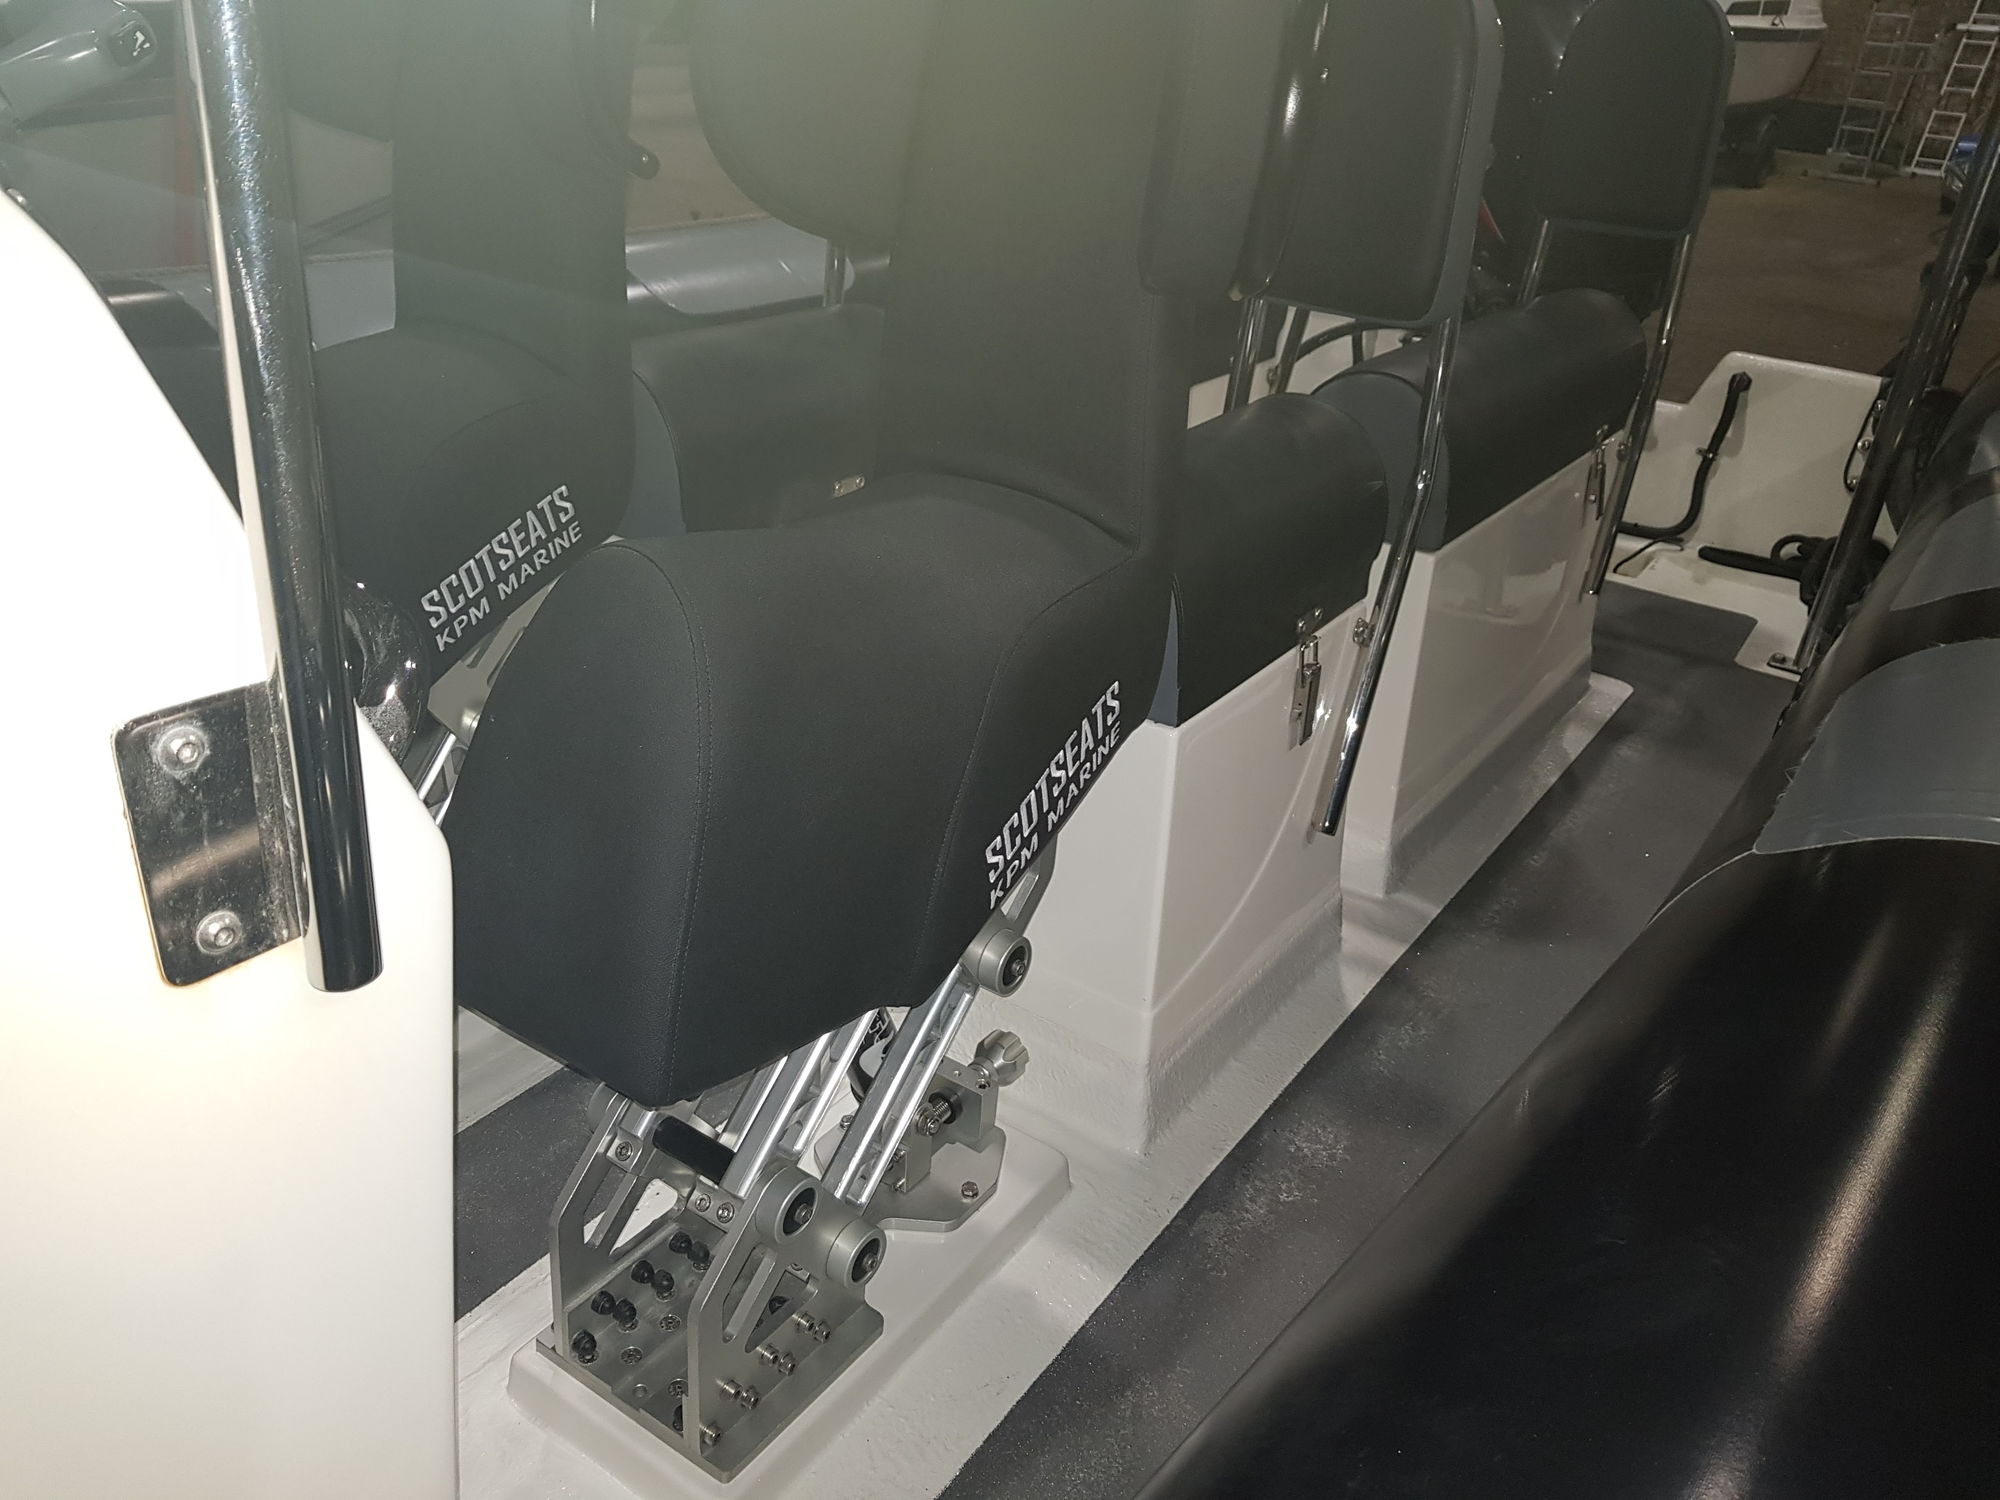 Suspension seats - opinions - The Hull Truth - Boating and Fishing